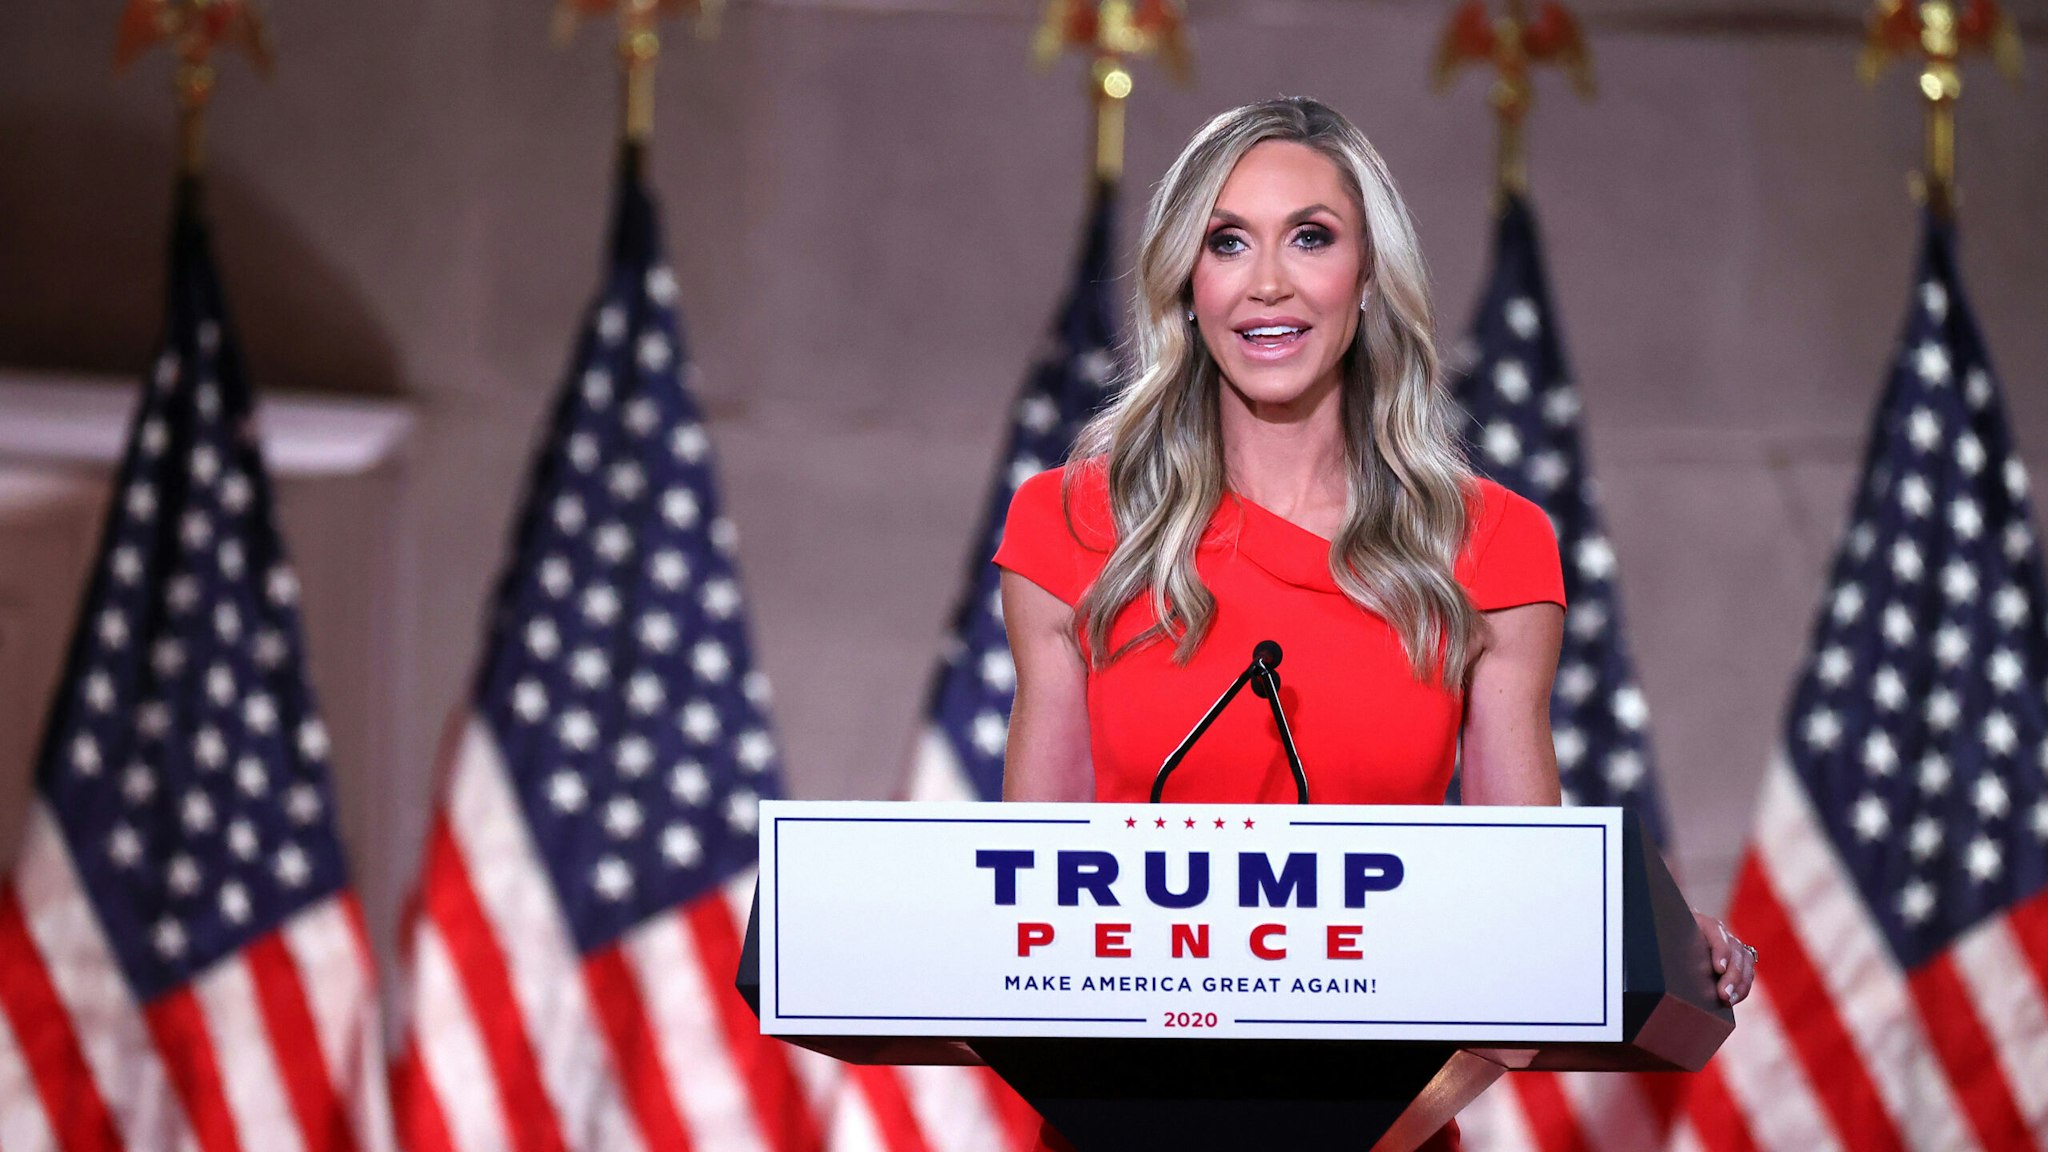 WASHINGTON, DC - AUGUST 26: Lara Trump, daughter-in-law and campaign advisor for U.S. President Donald Trump, pre-records her address to the Republican National Convention from inside an empty Mellon Auditorium on August 26, 2020 in Washington, DC. The novel coronavirus pandemic has forced the Republican Party to move away from an in-person convention to a televised format, similar to the Democratic Party's convention a week earlier.